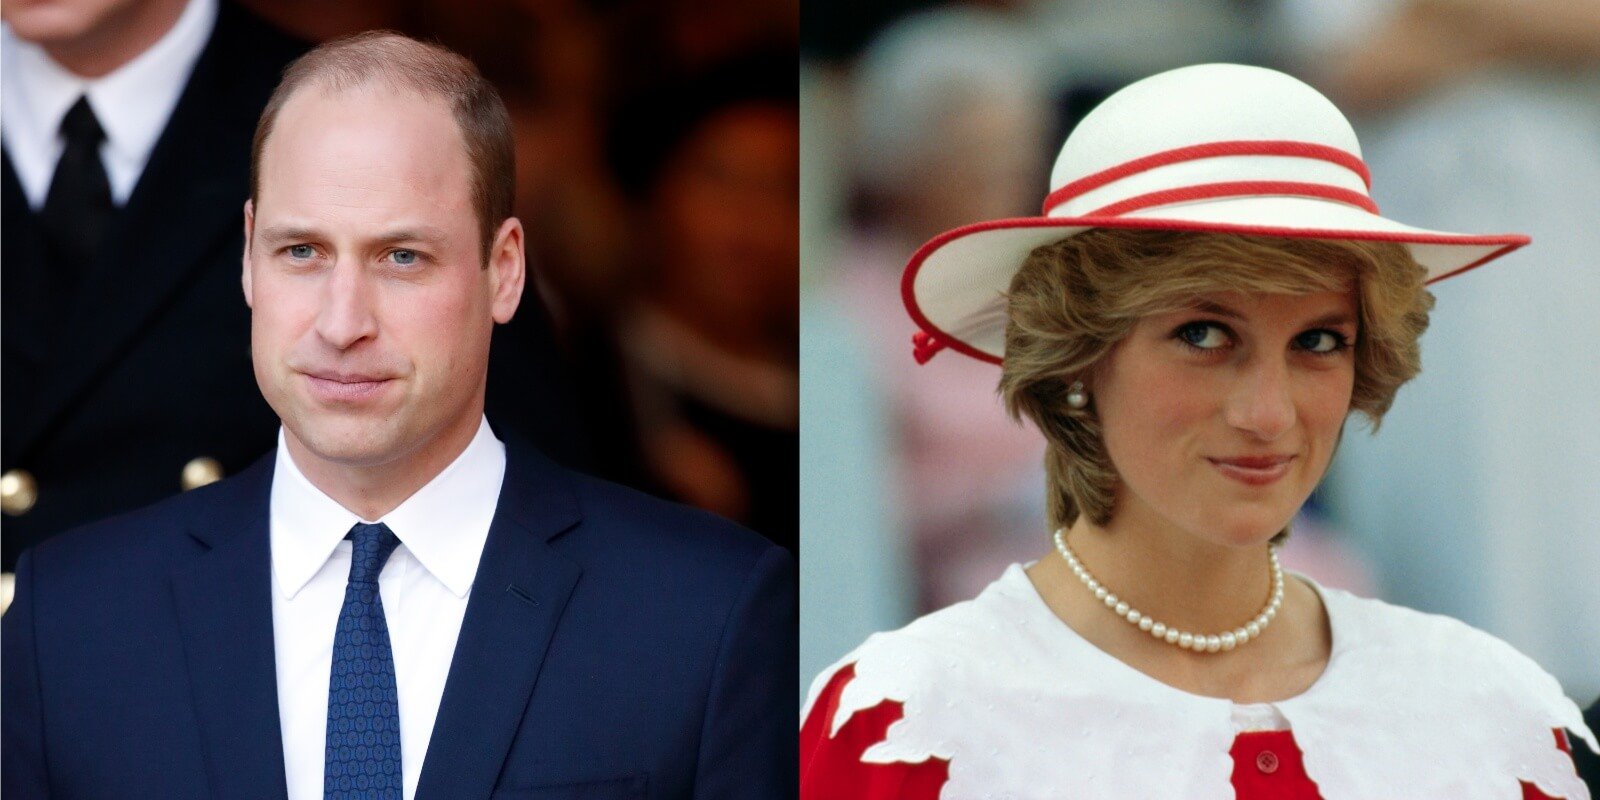 Side by side photos of Prince William and Princess Diana.